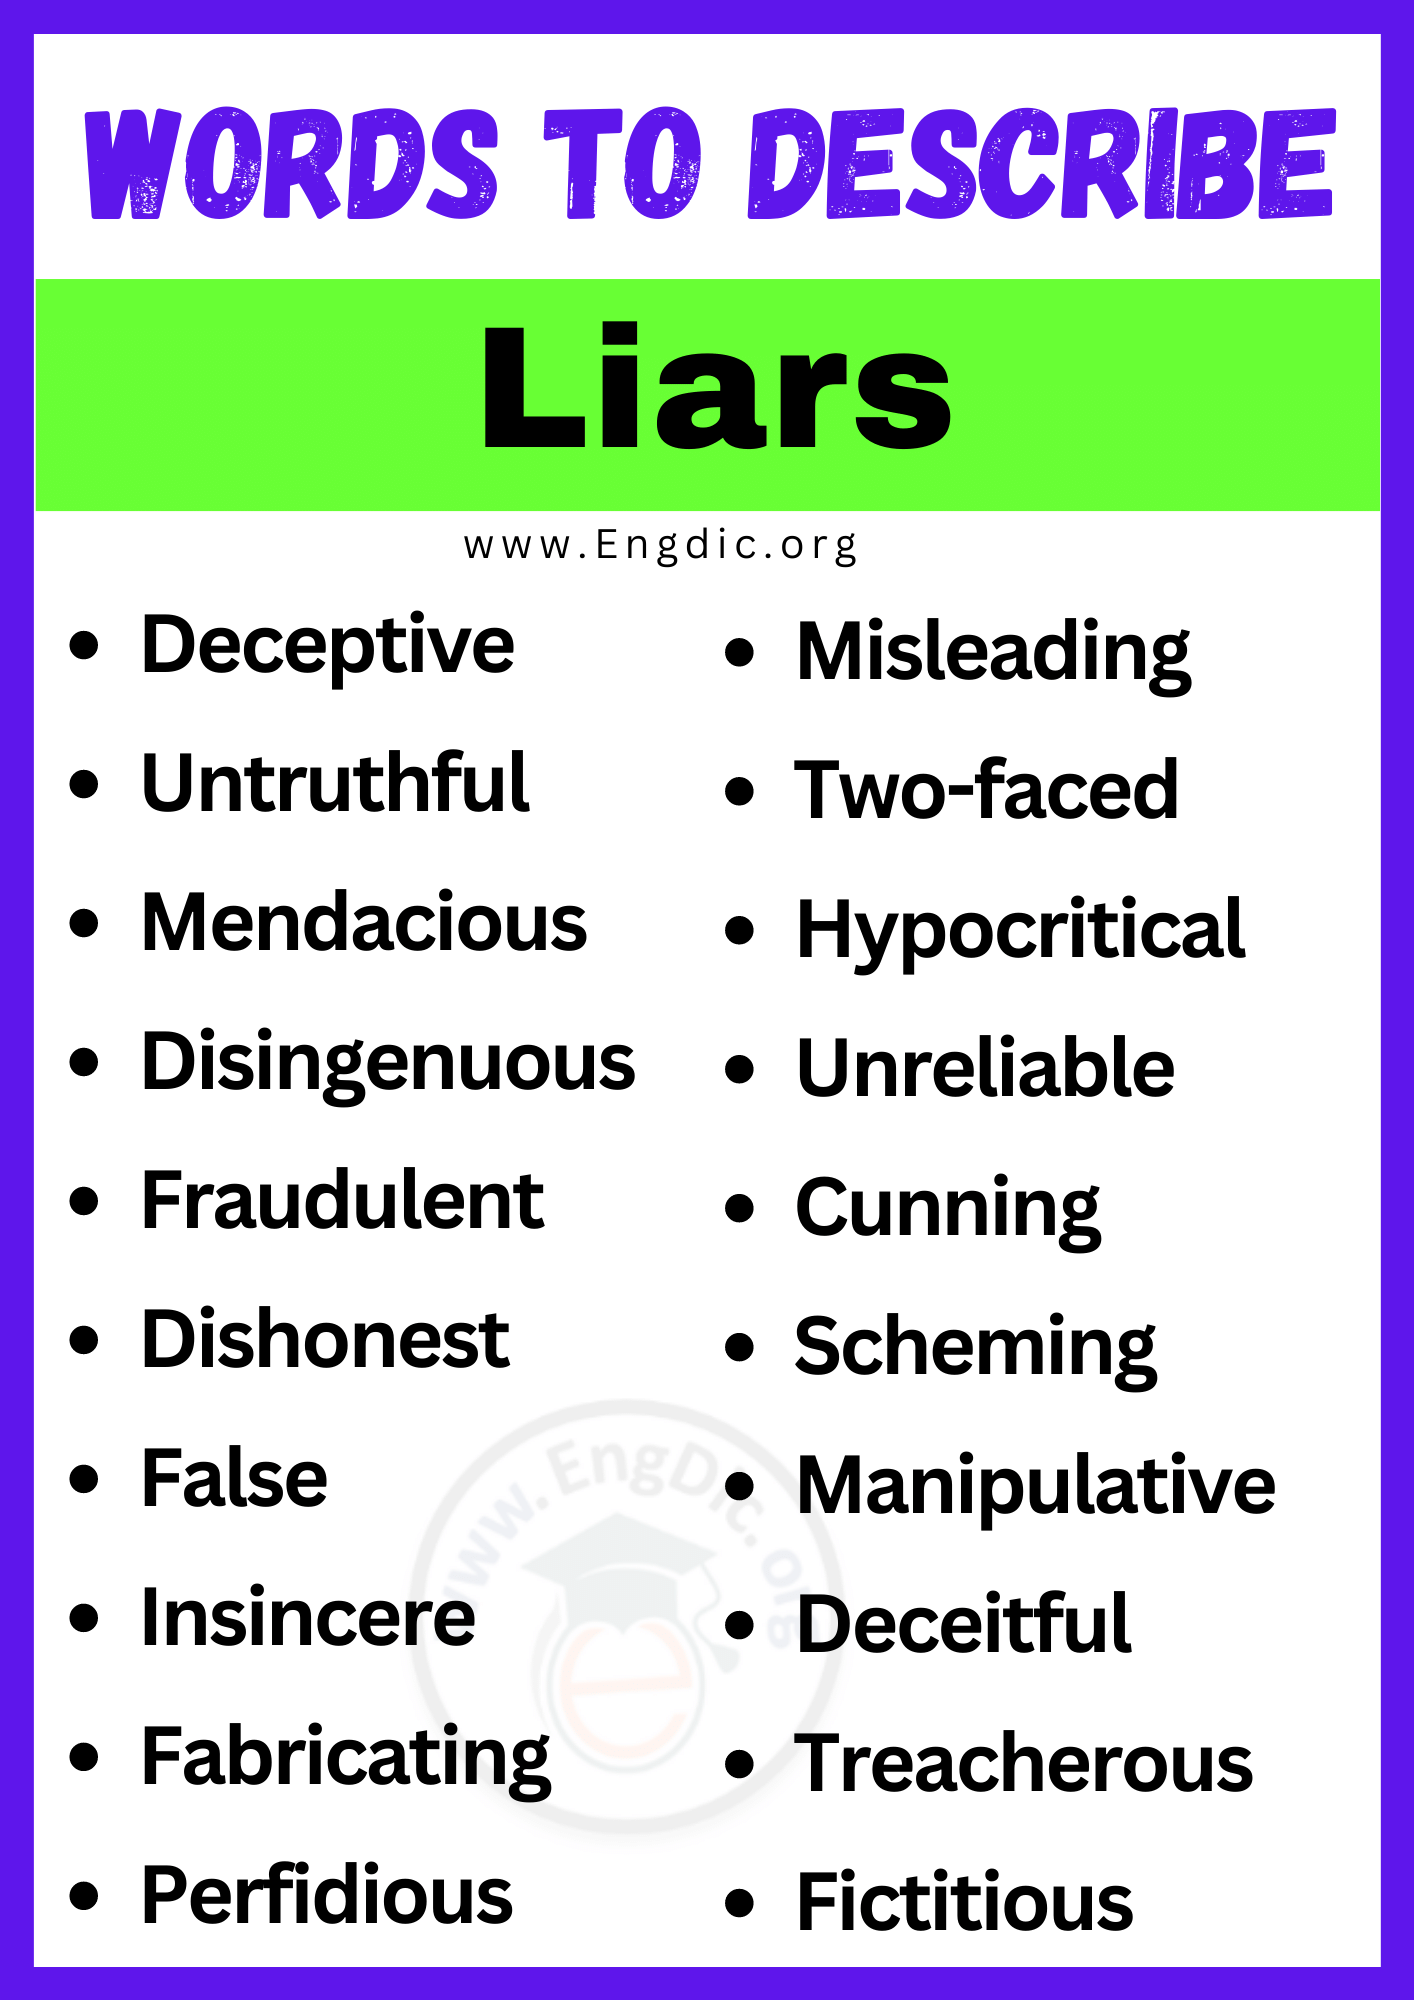 Words to Describe Liars